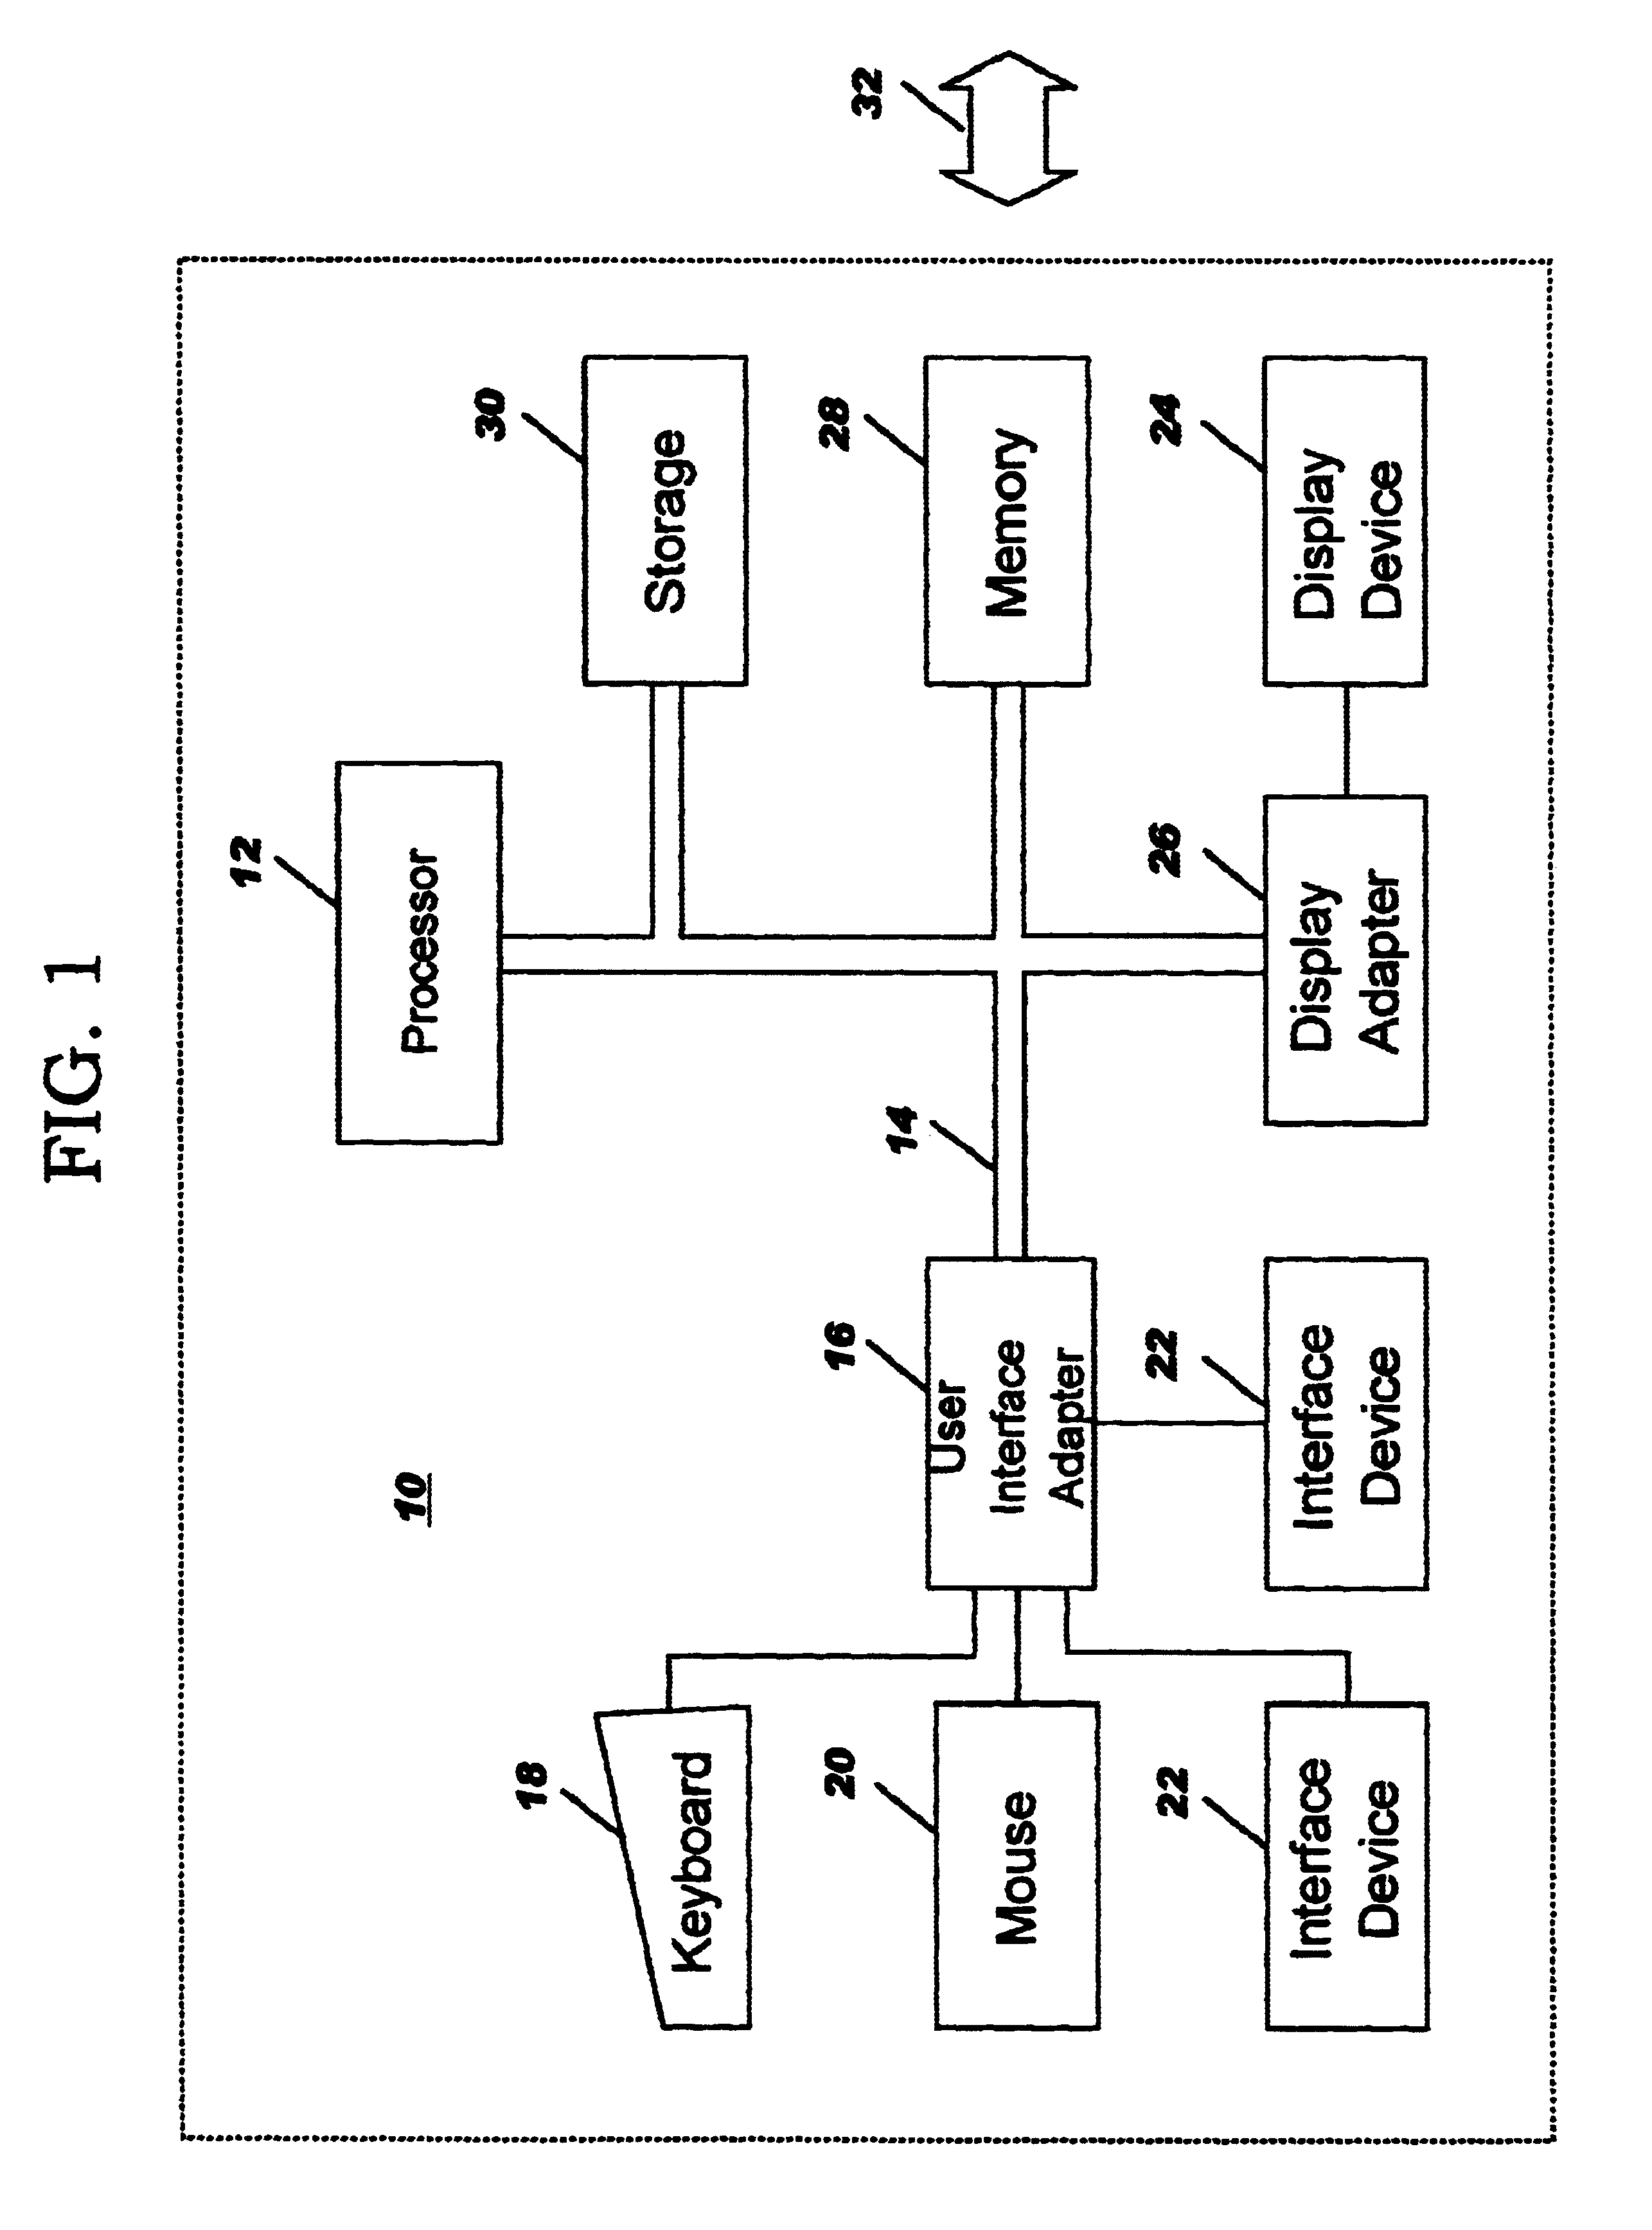 Authentication method to enable servers using public key authentication to obtain user-delegated tickets